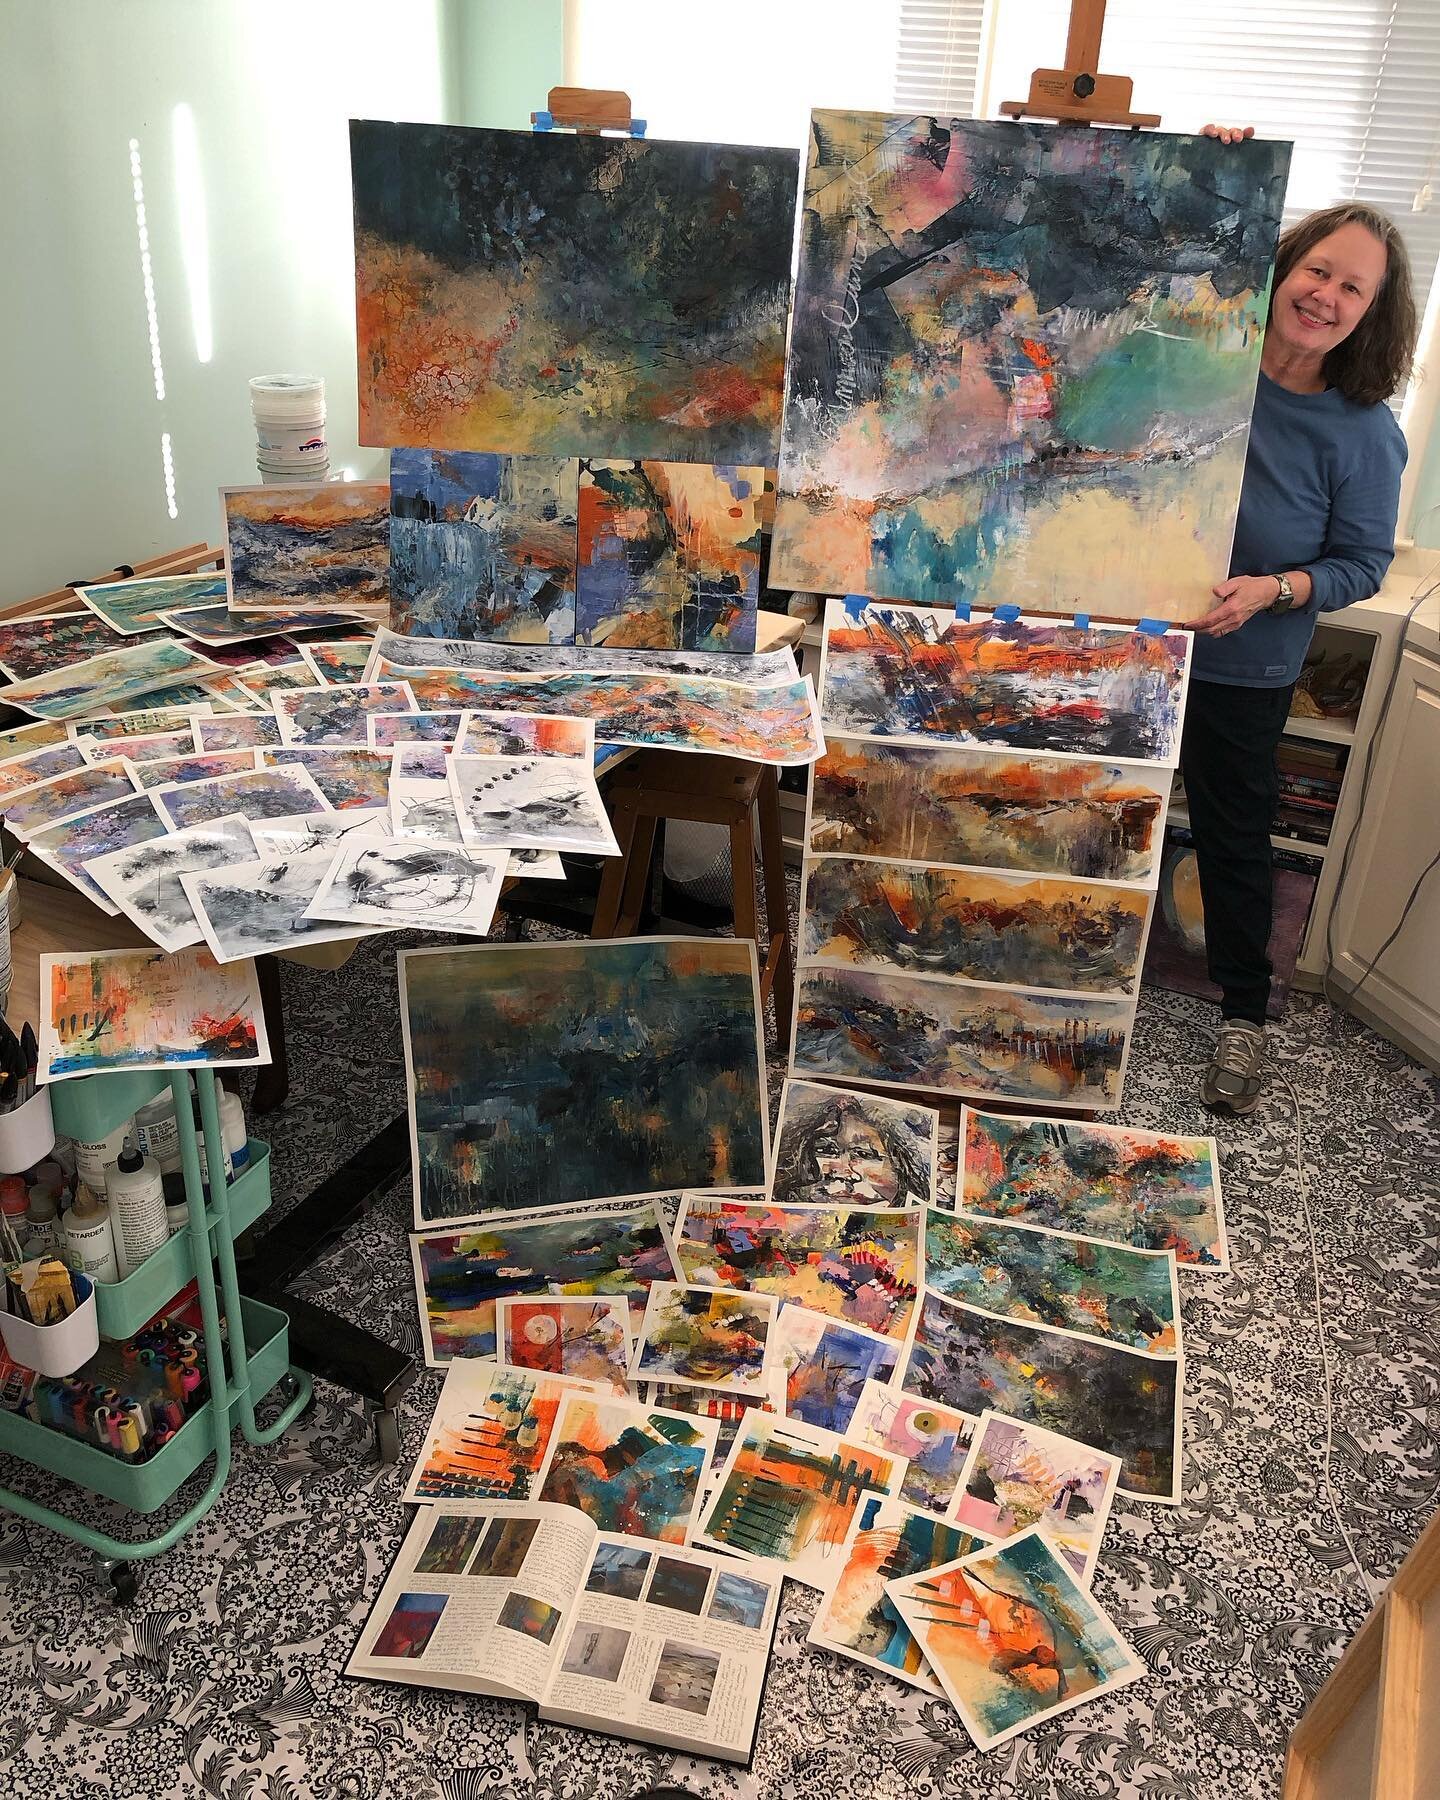 Finished my second year of 12 weeks of joy with @louisefletcher_art Find Your Joy course. Such a great time and so much learning!

#fyj2023 
#abstractartist 
#findyourjoy2023